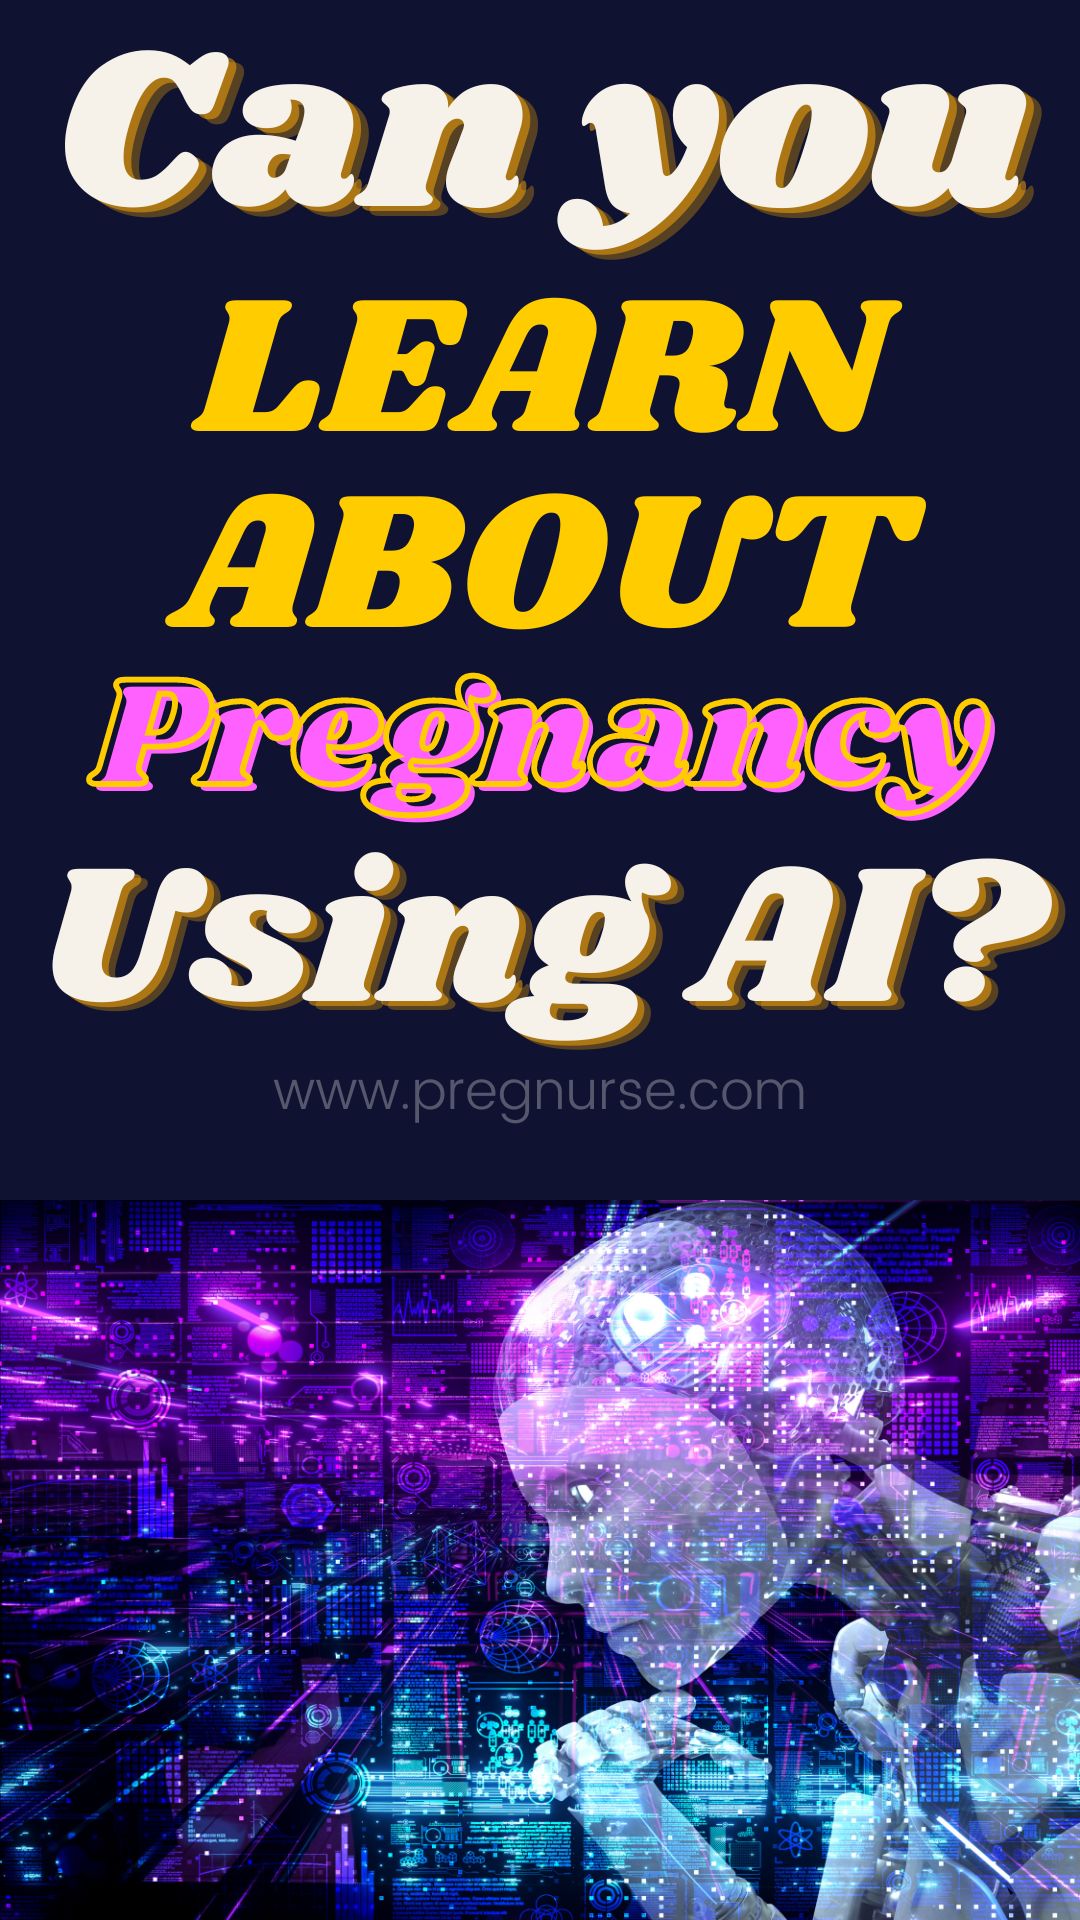 Can you use the newest technology to learn about your pregnancy and the best ways to promote both your's and the baby's health? Is AI up to that important task?